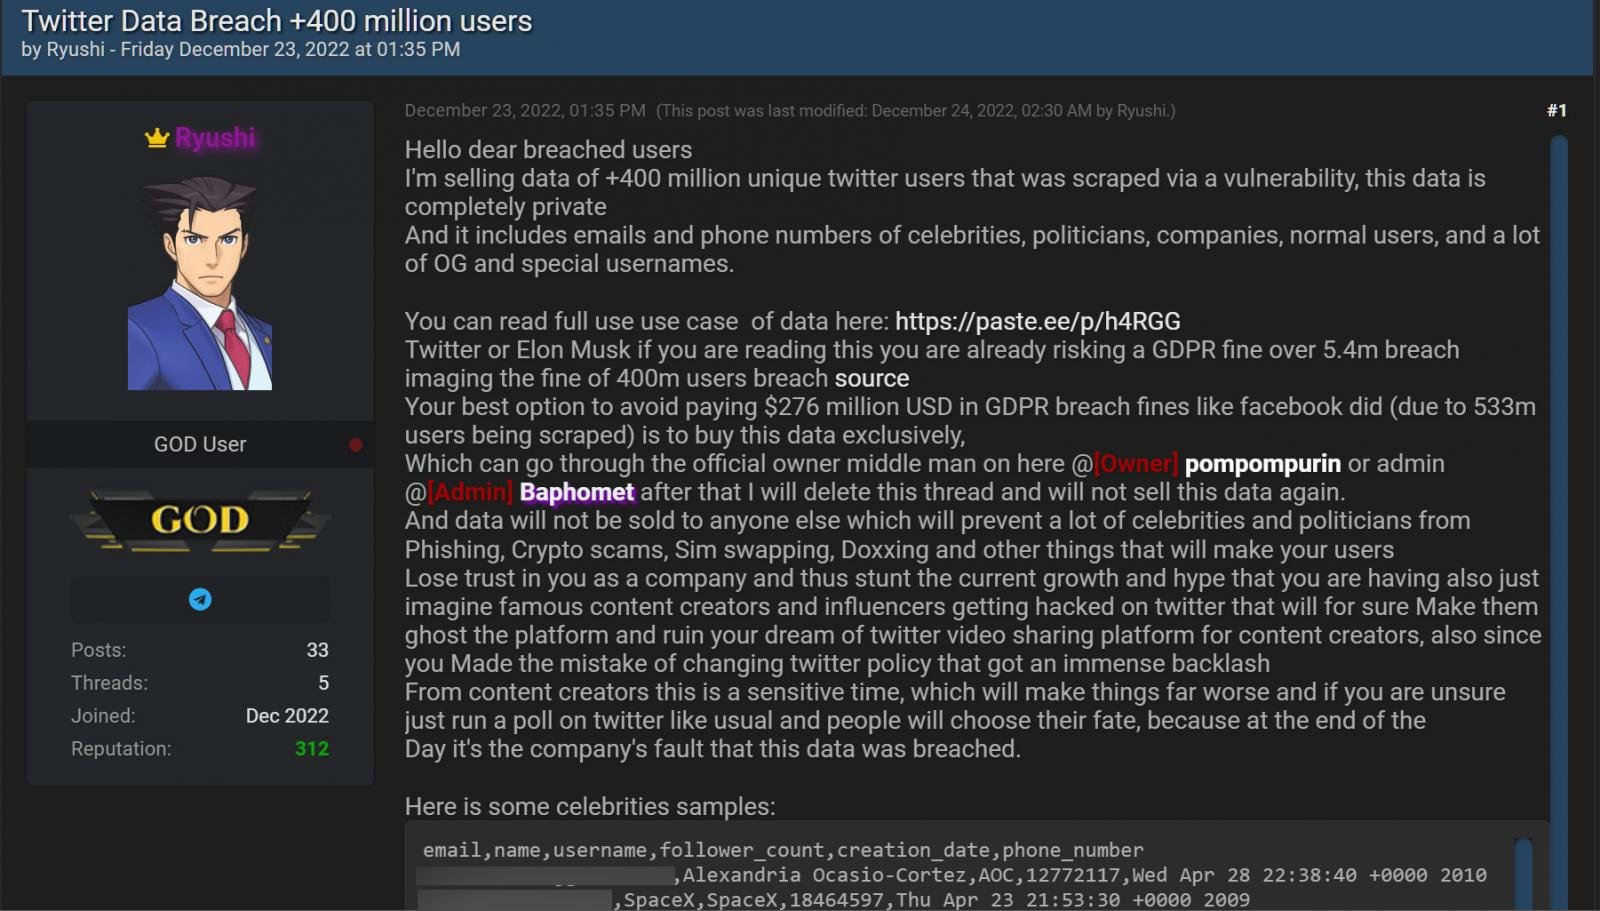 Forum post selling data of alleged 400 million Twitter users